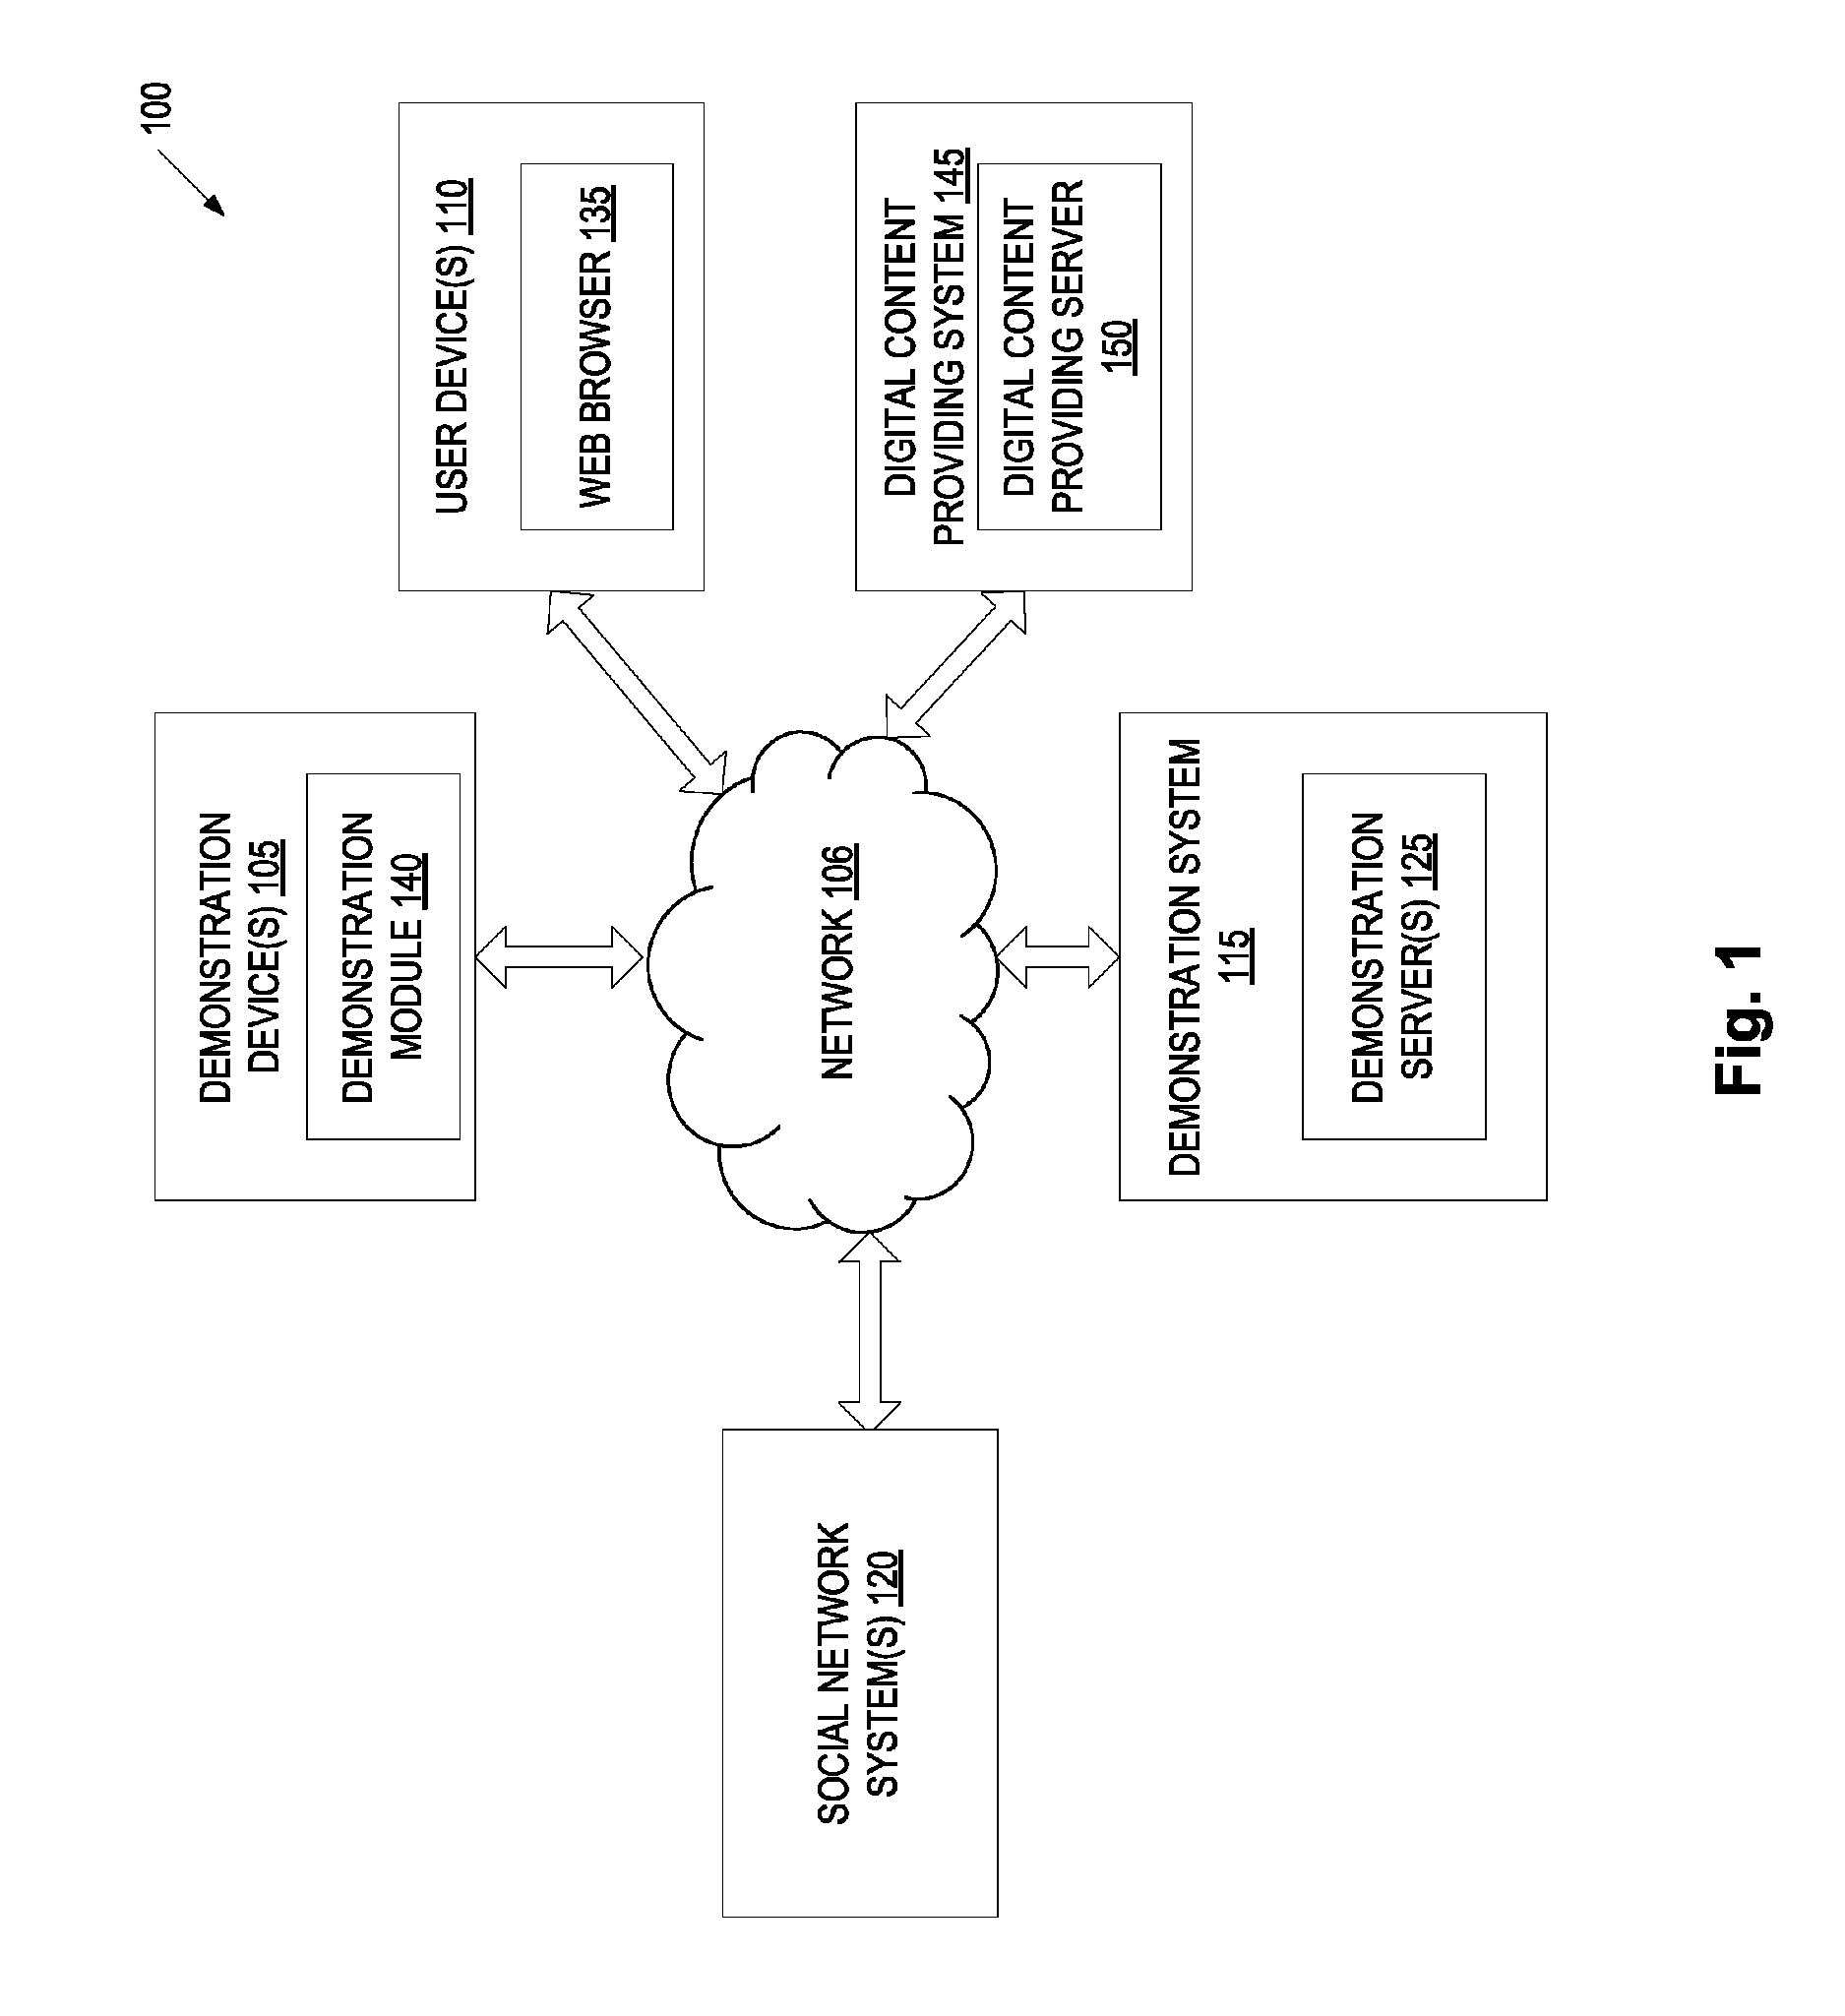 Sharing demonstration information by a network connected demonstration device and system